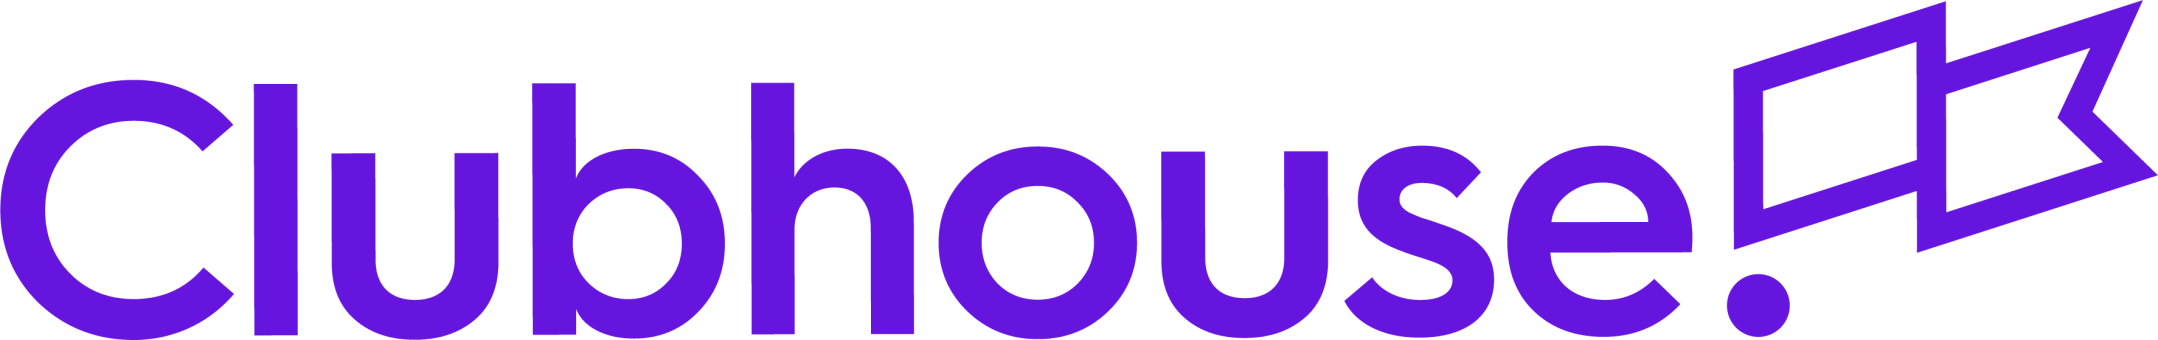 What is Clubhouse UBU blog image clubhouse logo.png